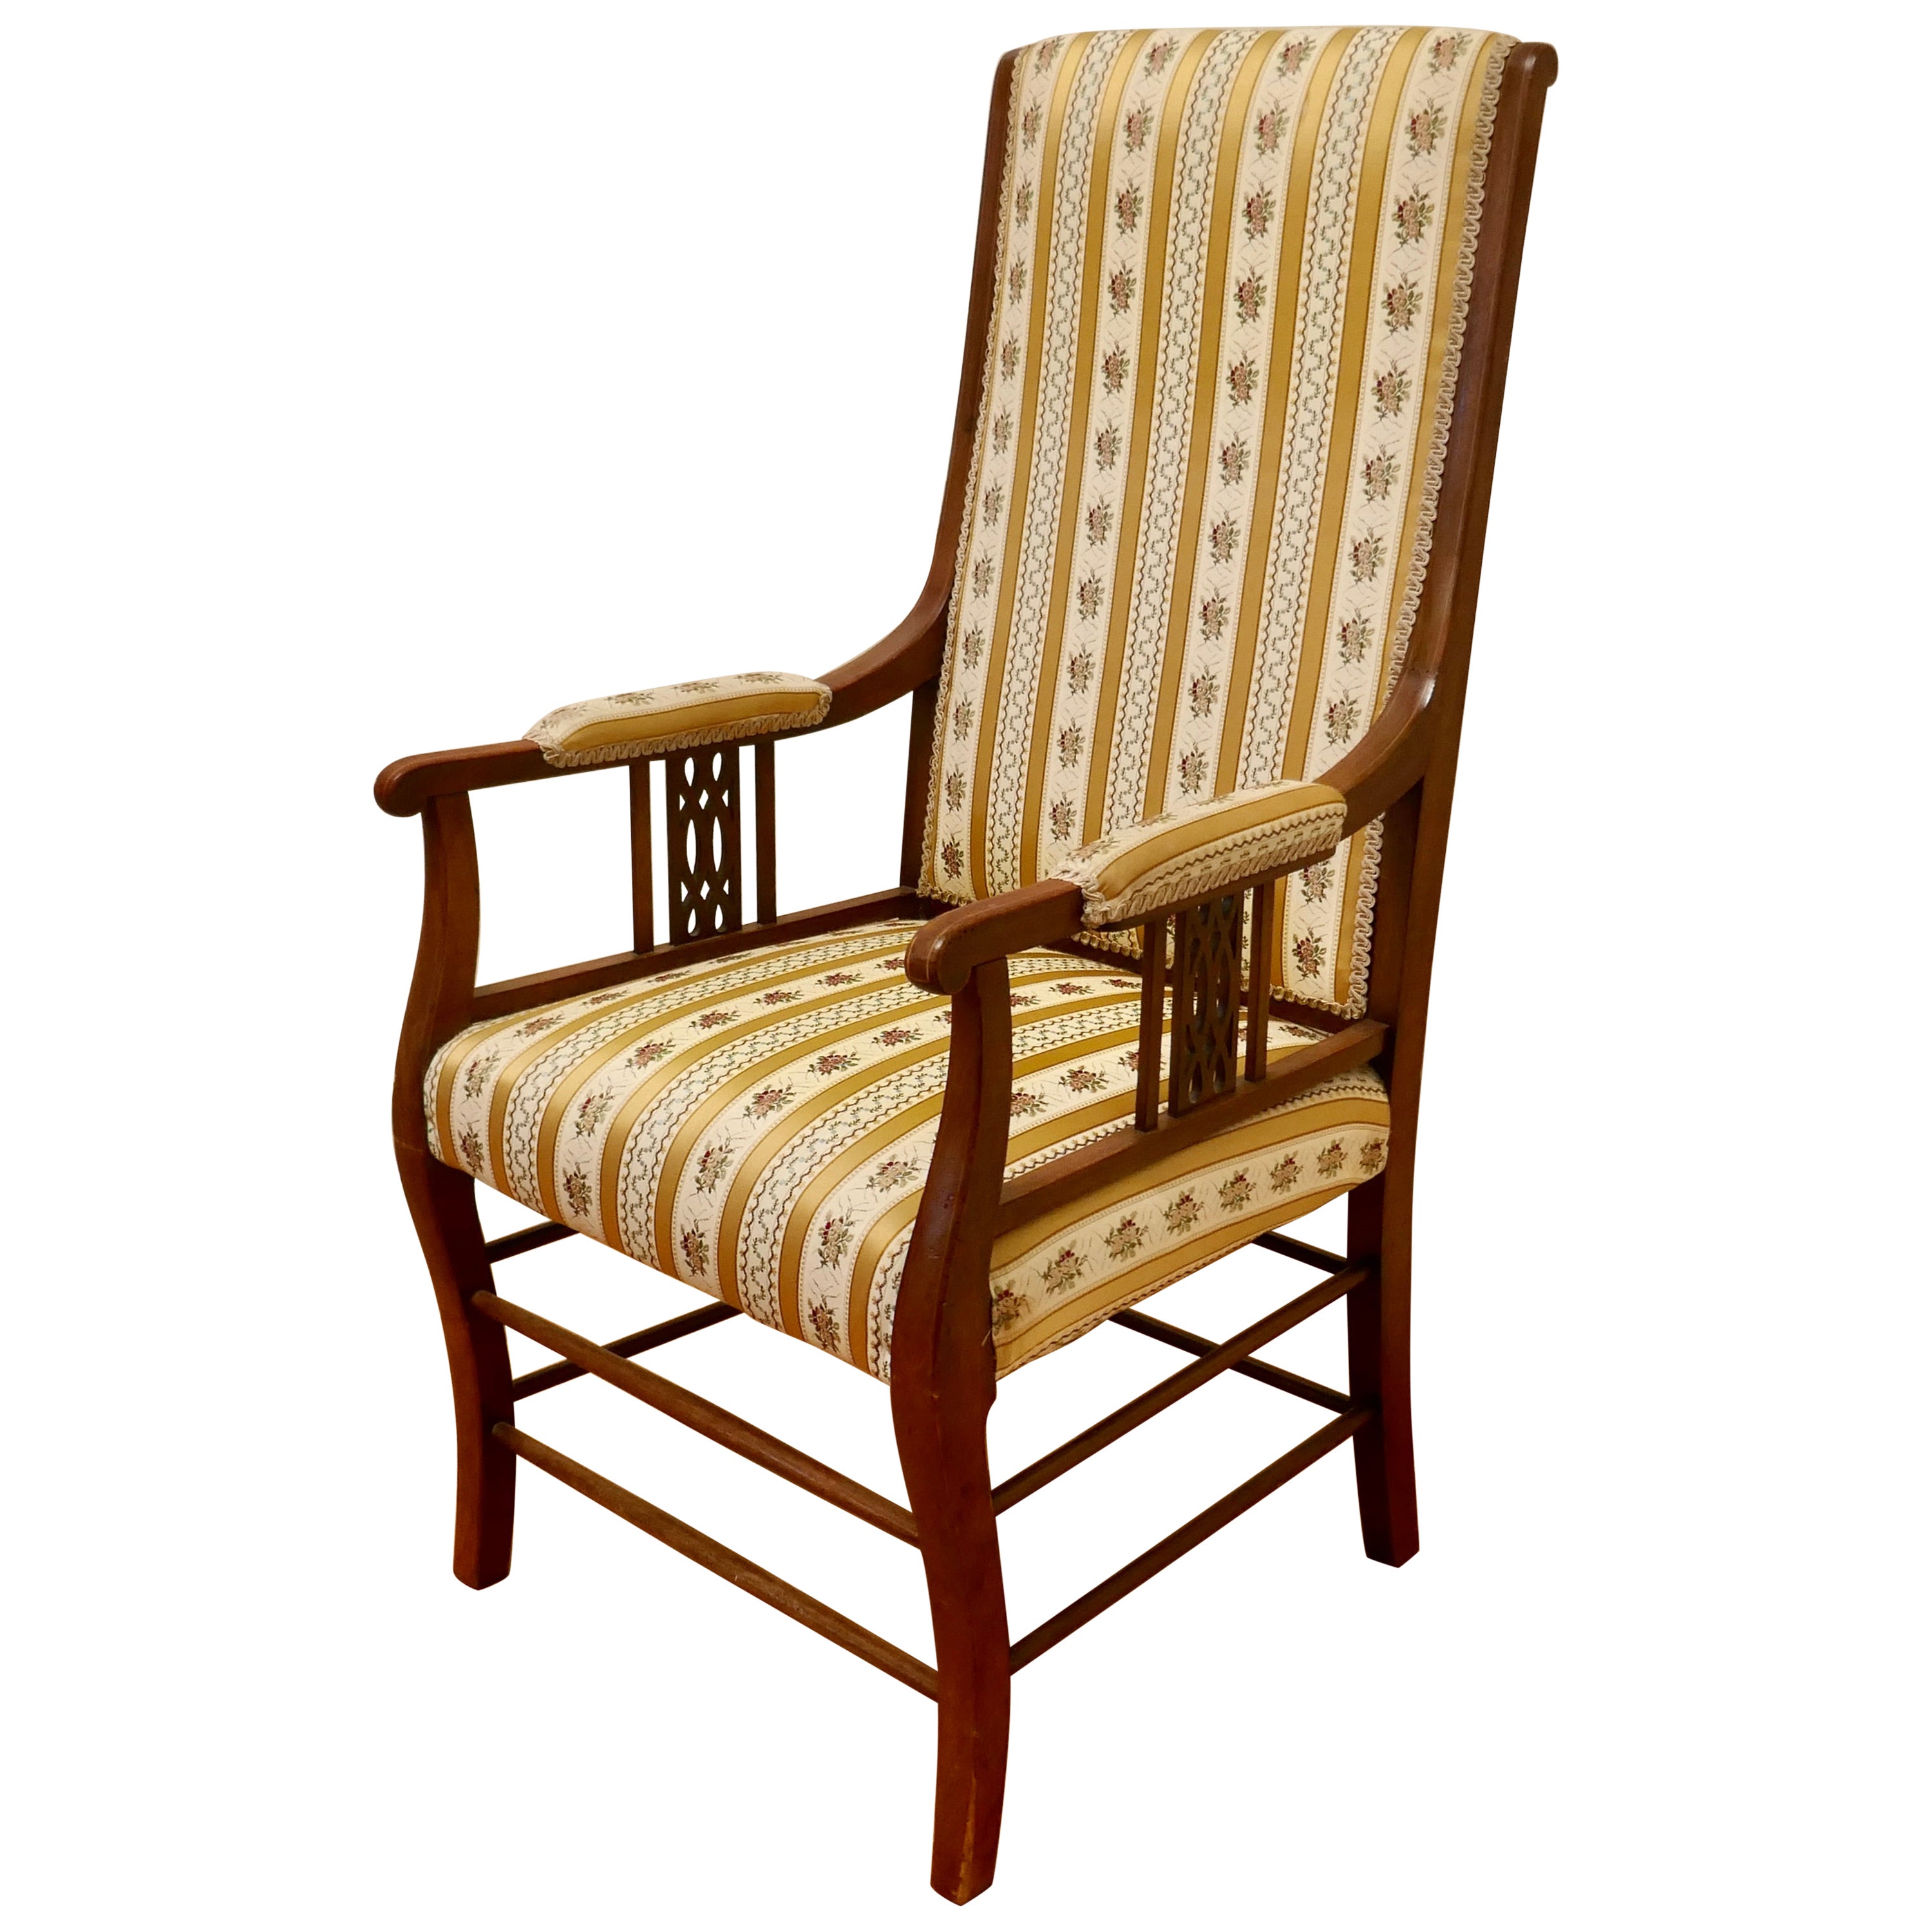 Fine Quality Regency Style High Back Upholstered Arm Chair For Sale